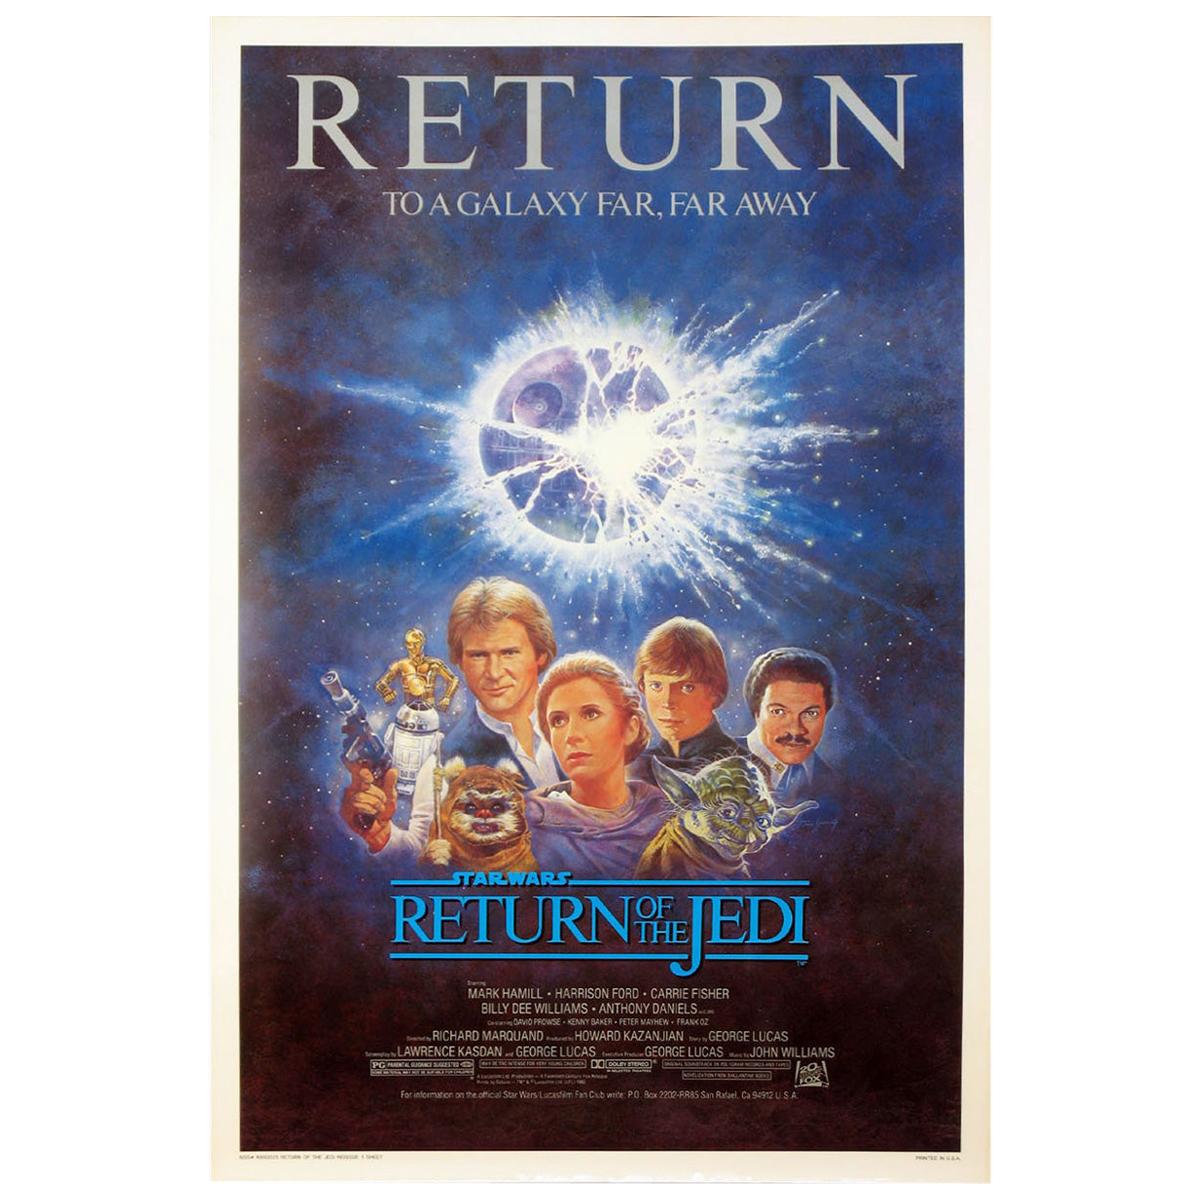 Return Of The Jedi ‘1985R’ Poster For Sale